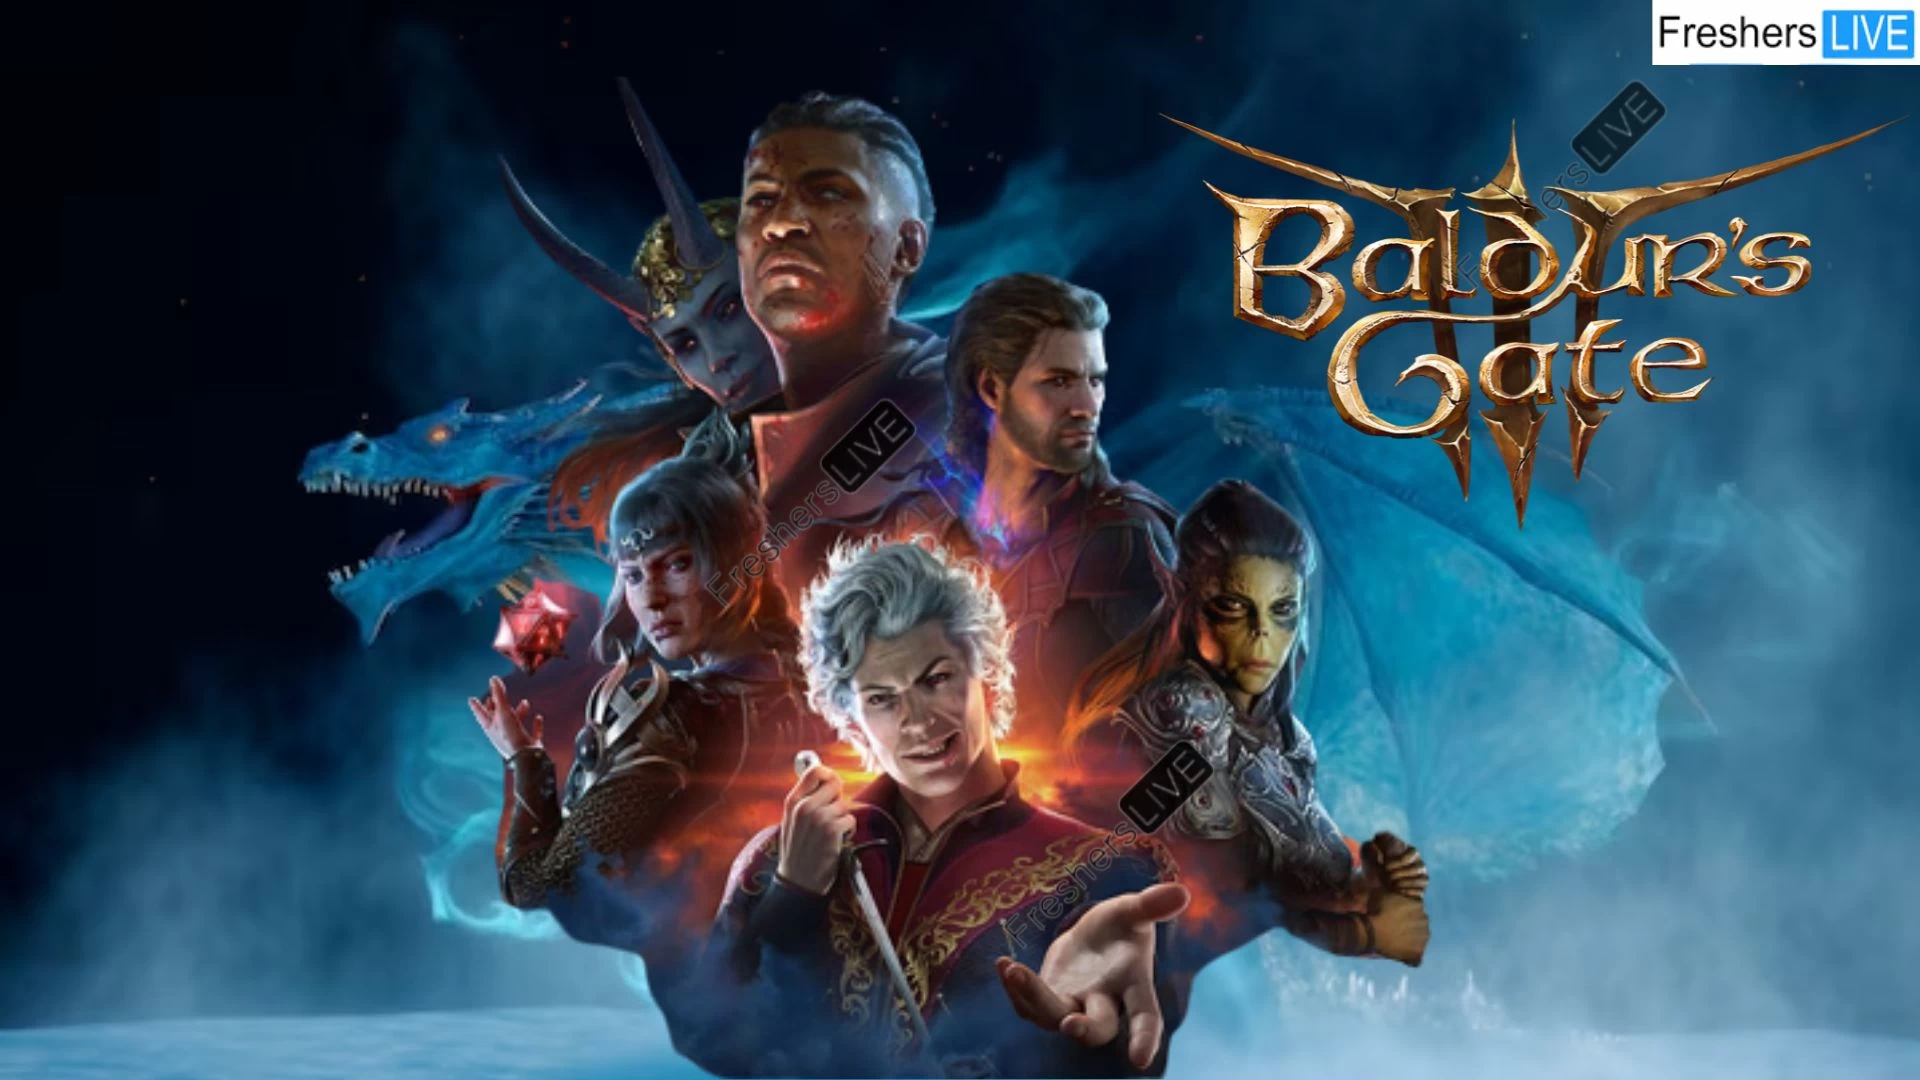 Can You Change Your Character in Baldurs Gate 3?